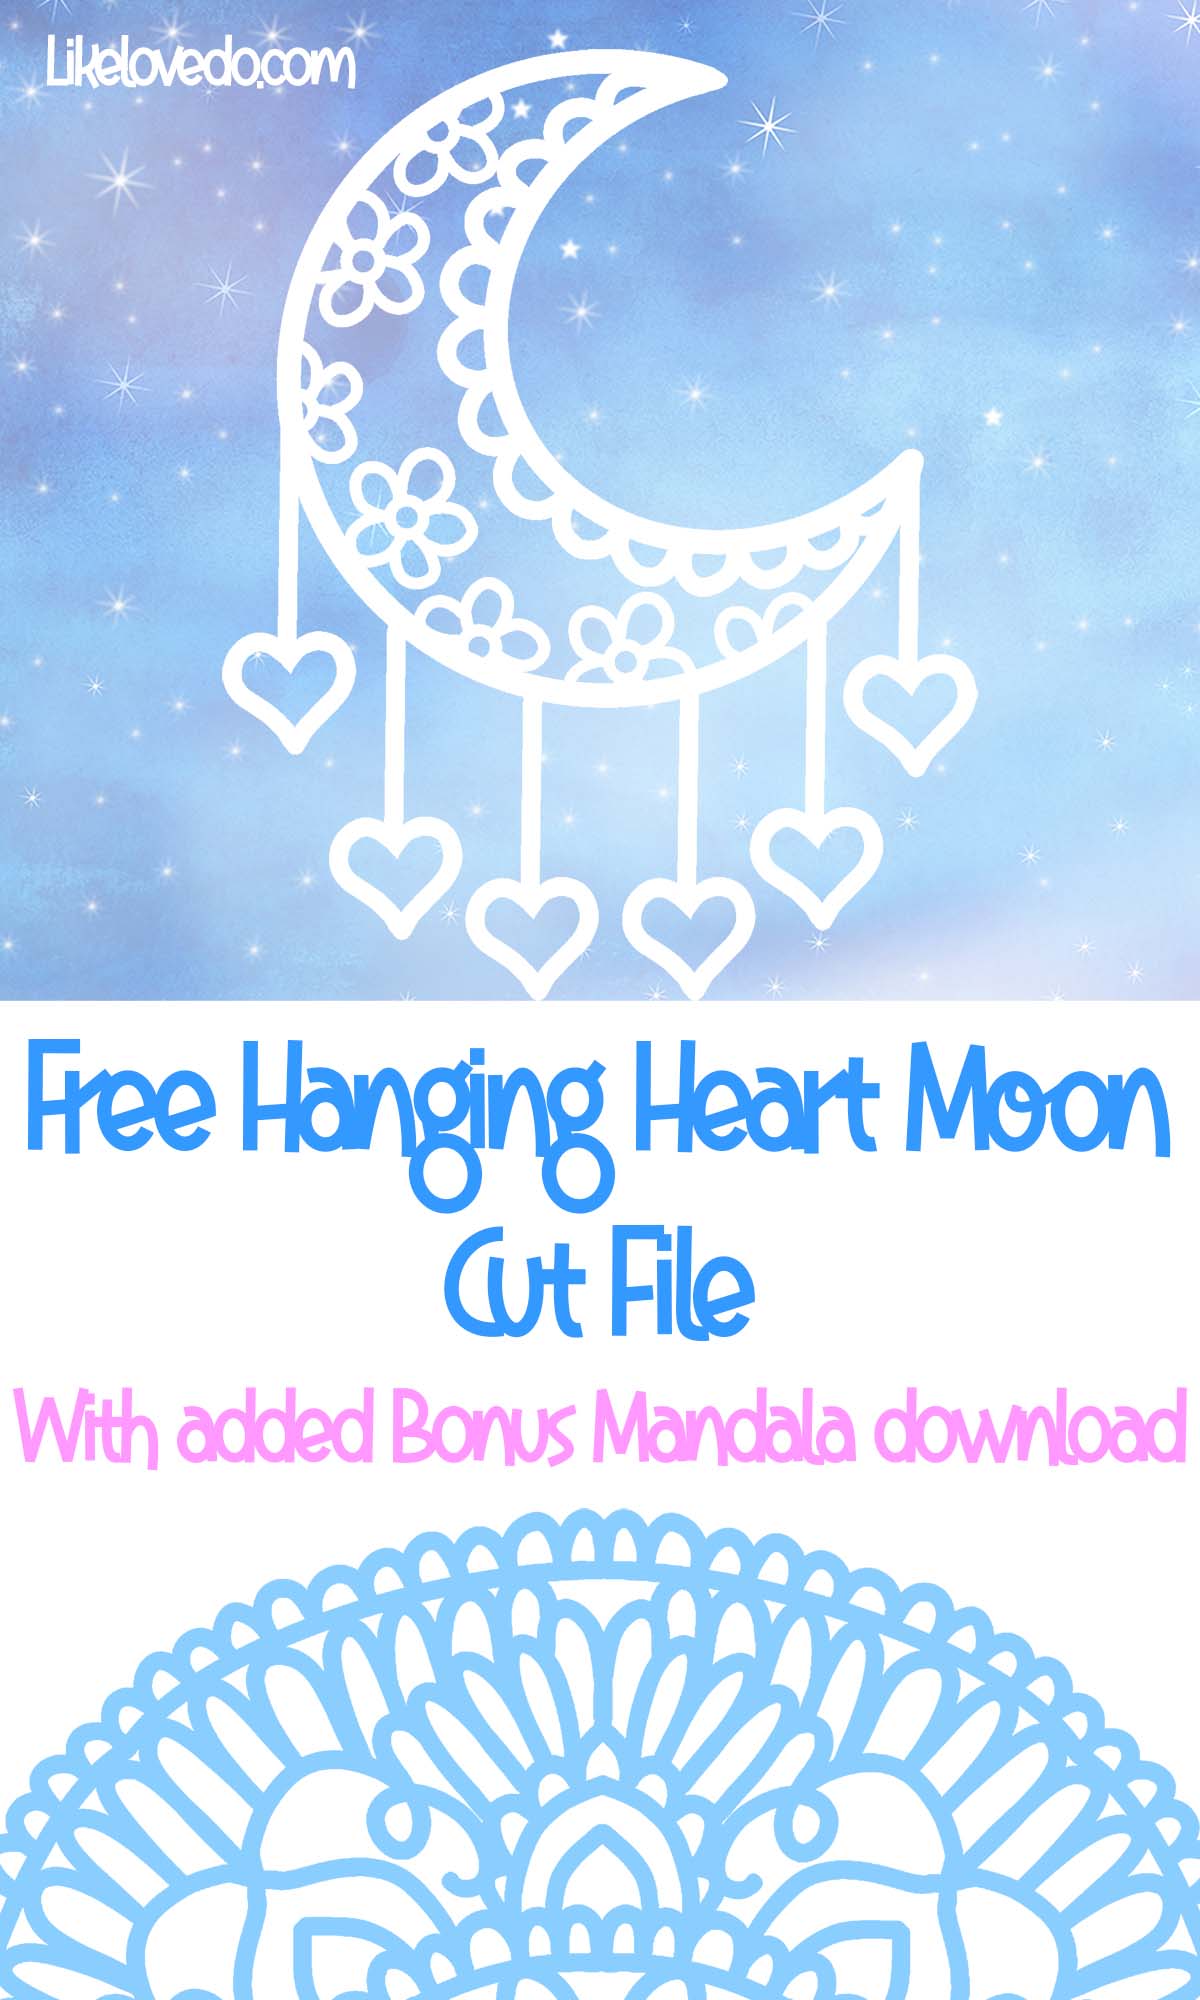 free hanging heart moon cut file and Mandala download for Silhouette 